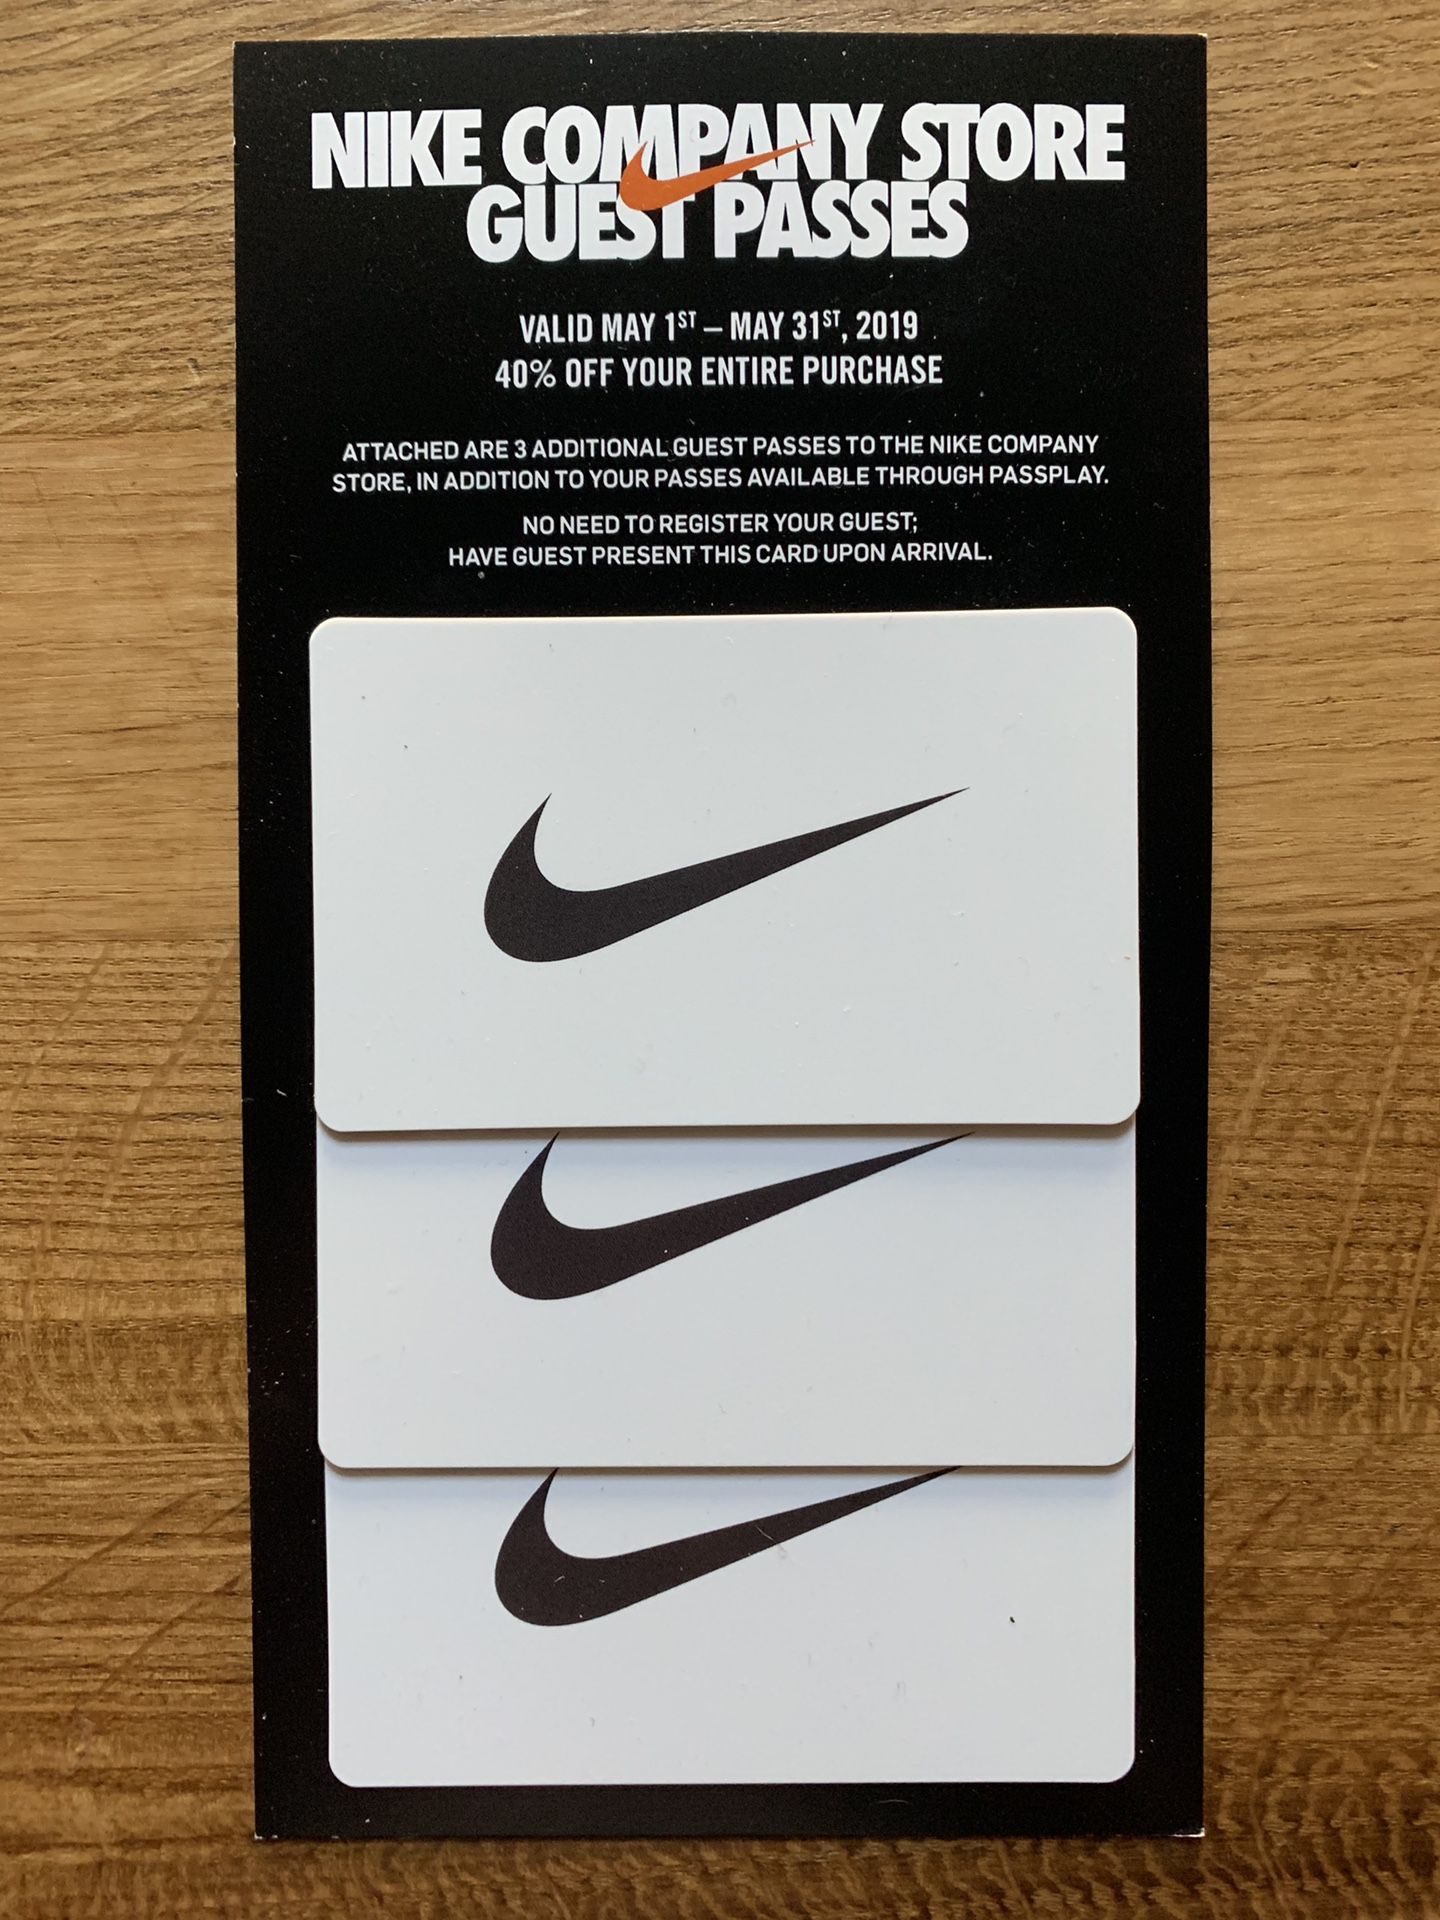 Nike employee store guest for Hillsboro, OR - OfferUp